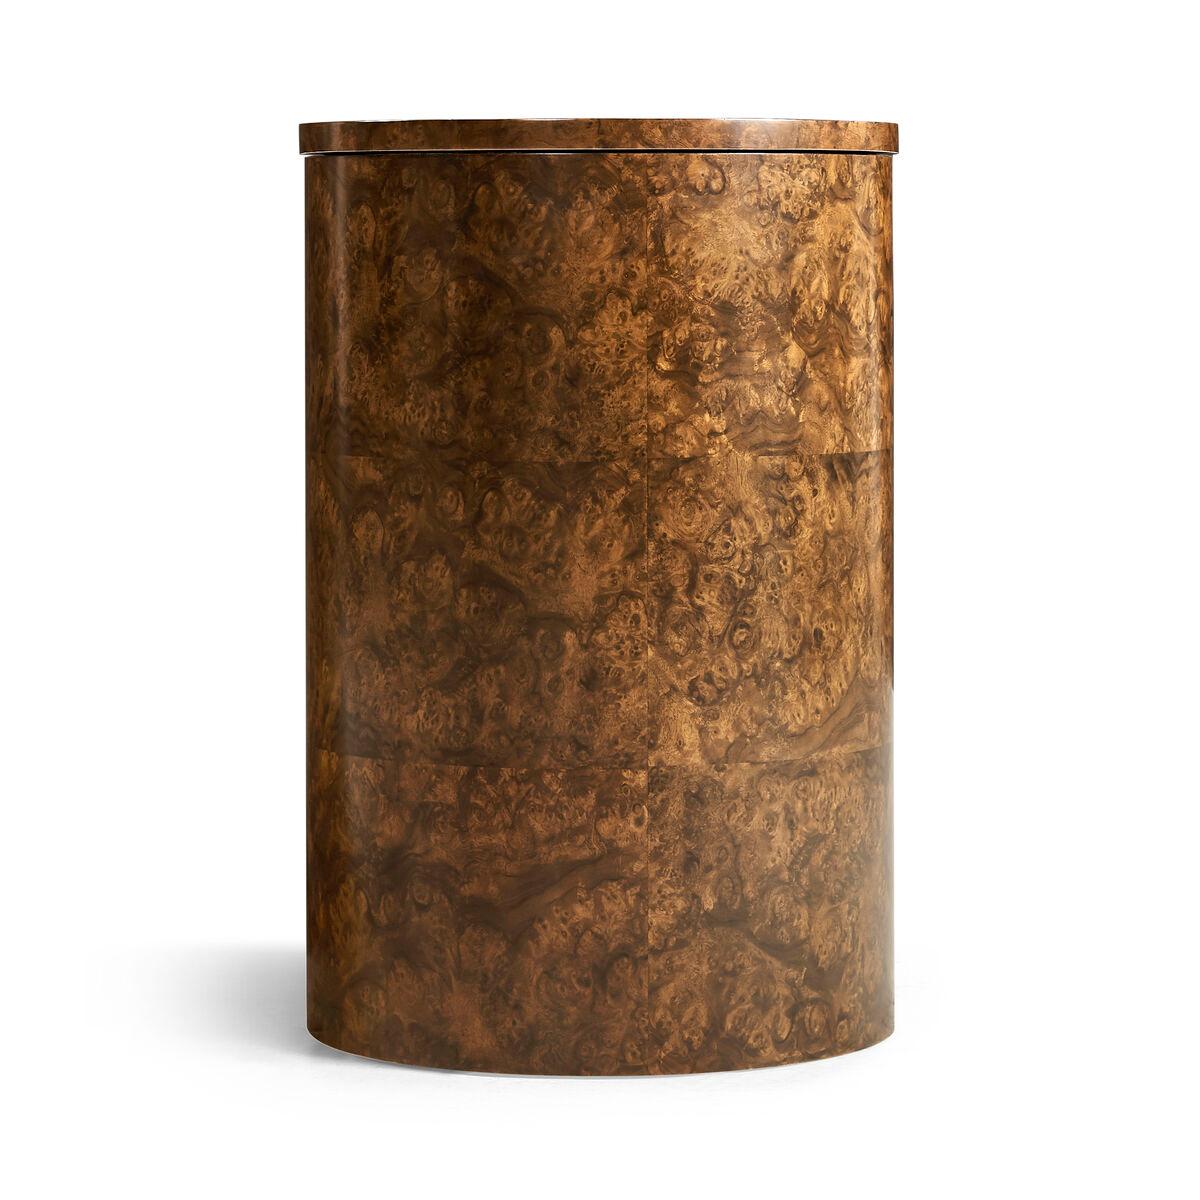 
This exquisite piece captivates with its compact, rounded silhouette, elegantly clad in book-matched burl walnut veneers, boasting a deep, swirling pattern that whispers stories of luxury and vintage allure.

The table's pièce de résistance is its